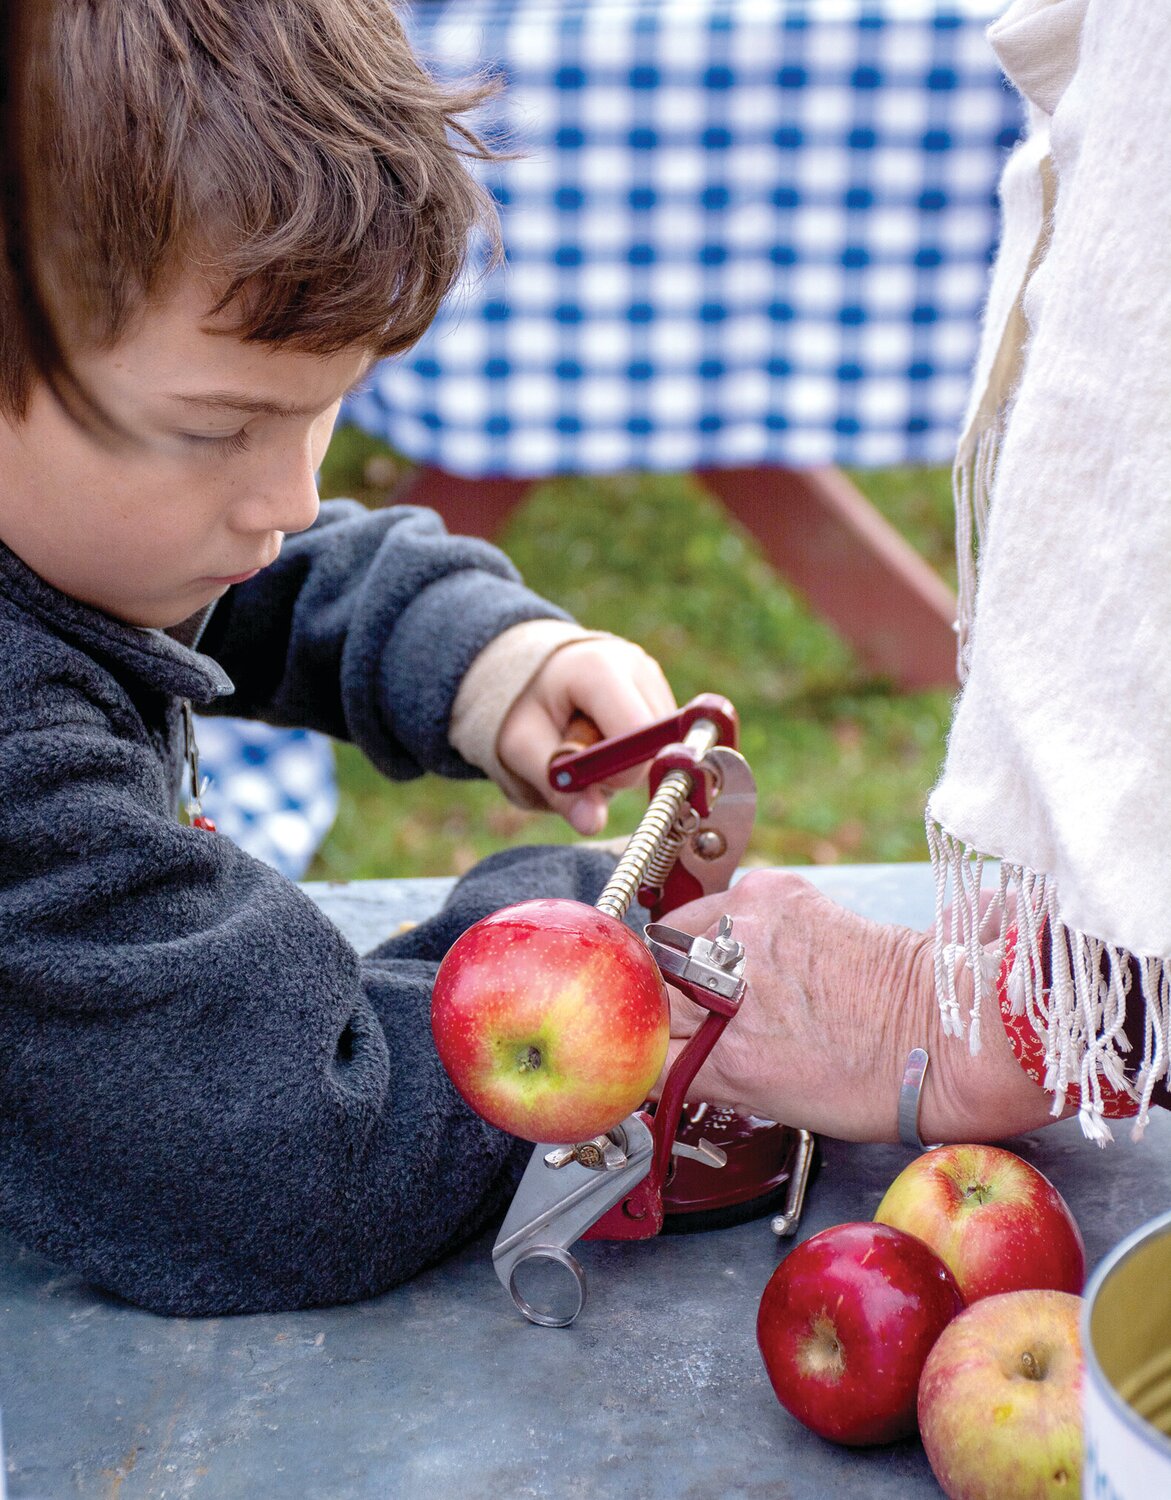 A child gets ready to peel an apple.